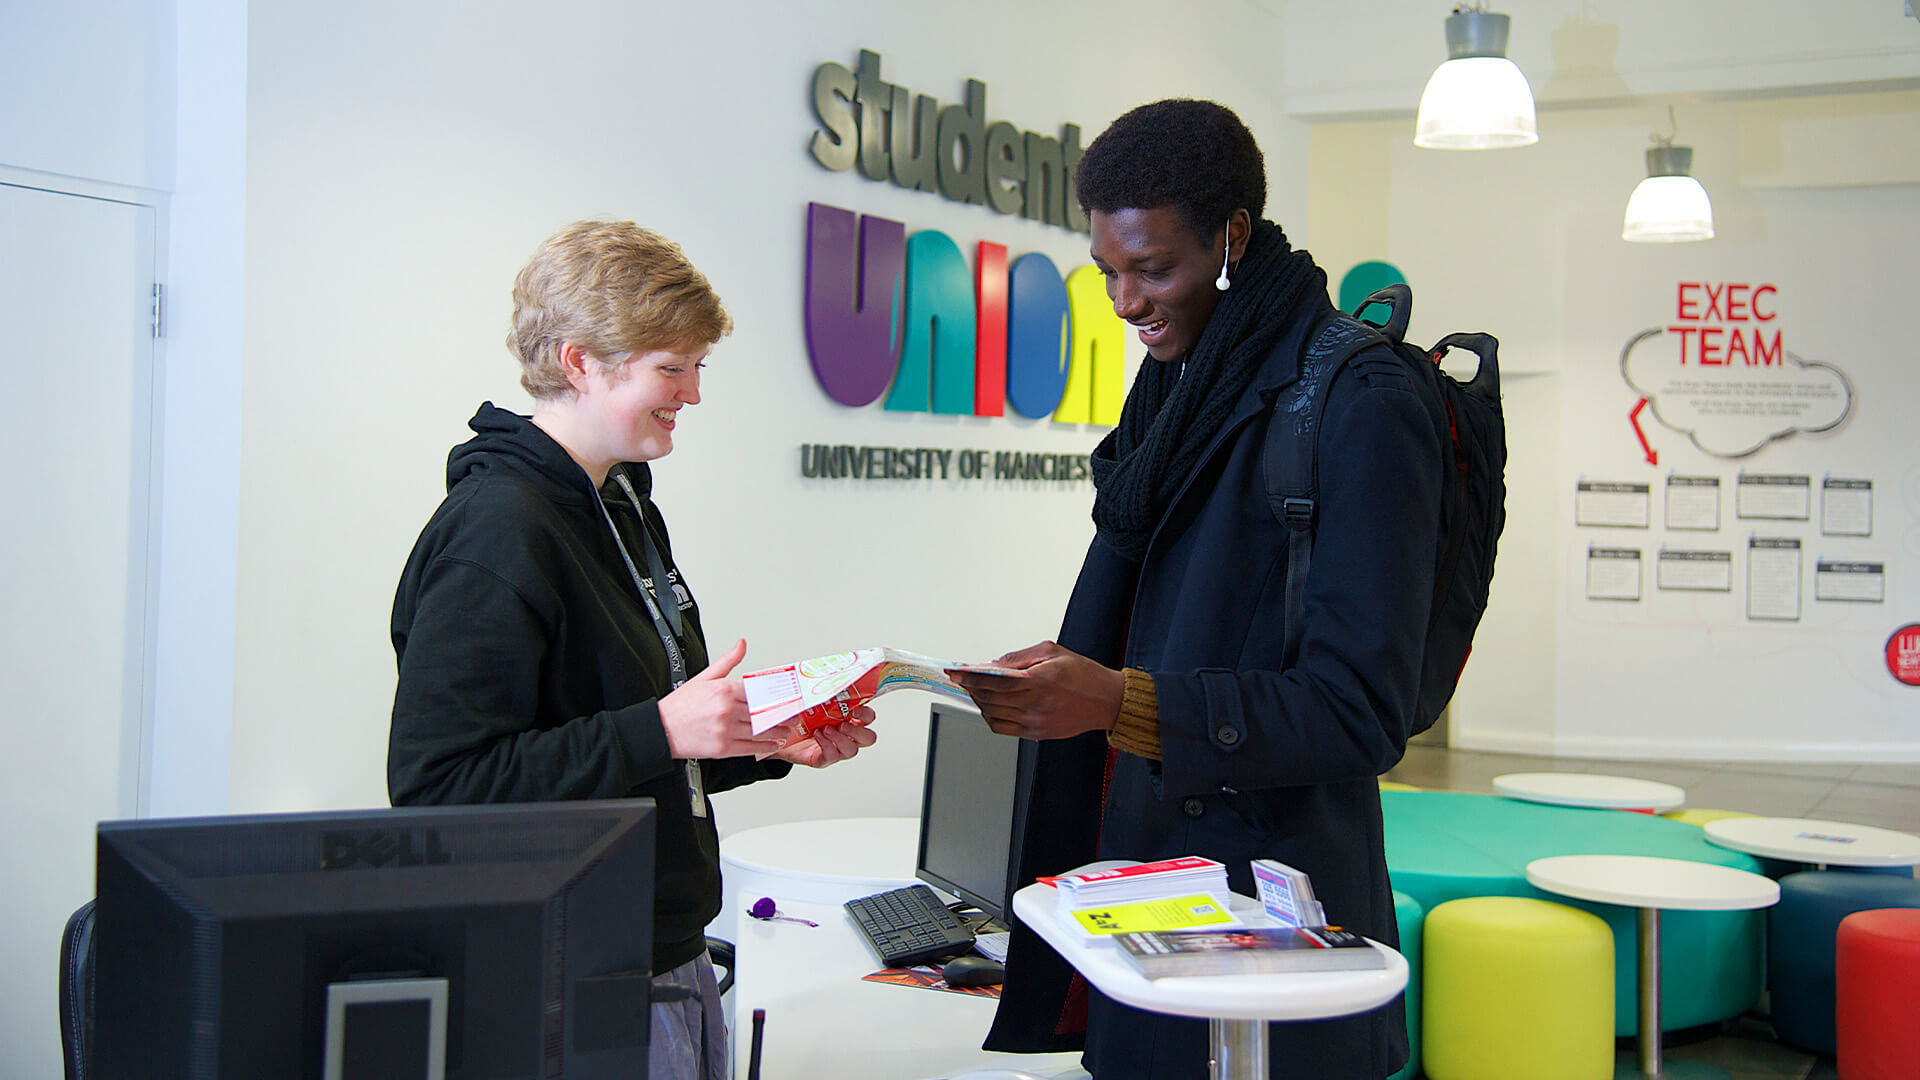 Placed at the heart of campus, the University of Manchester Students' Union is the hub of student life